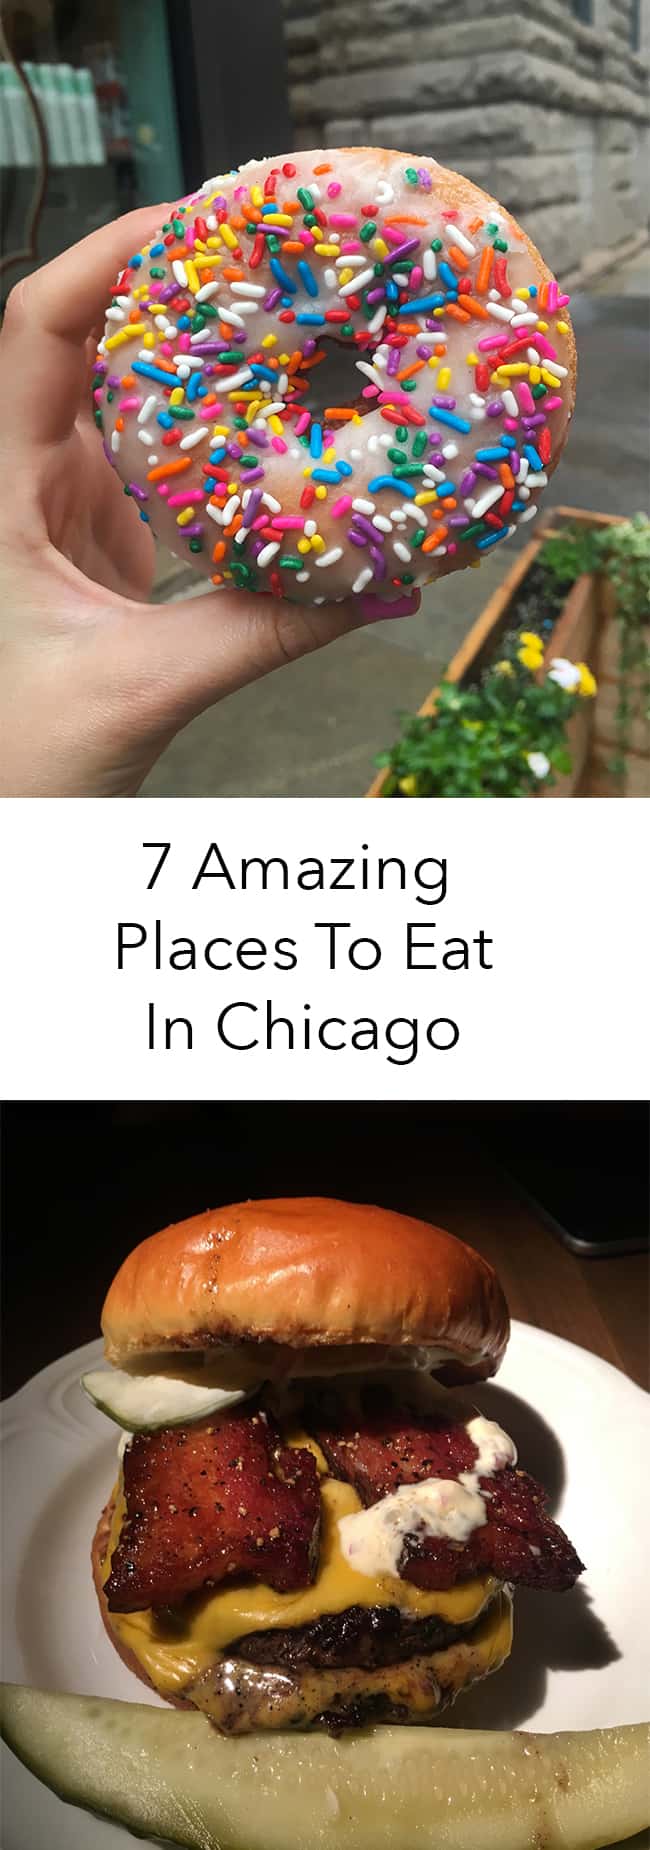 7 Amazing Places To Eat In Chicago